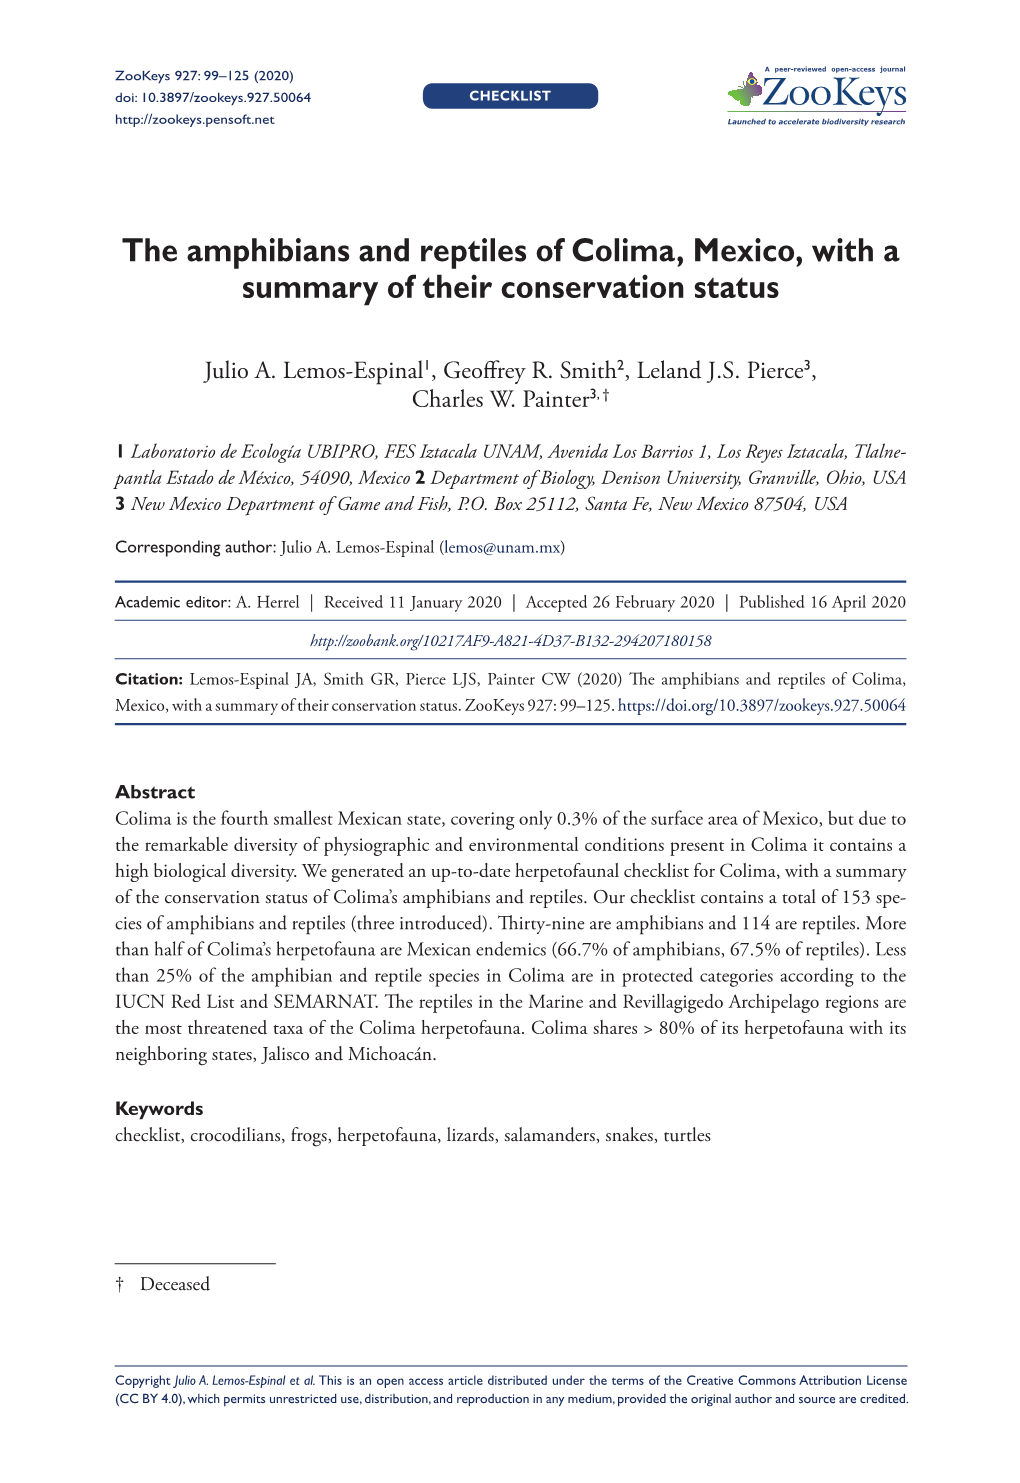 The Amphibians and Reptiles of Colima, Mexico, with a Summary of Their Conservation Status